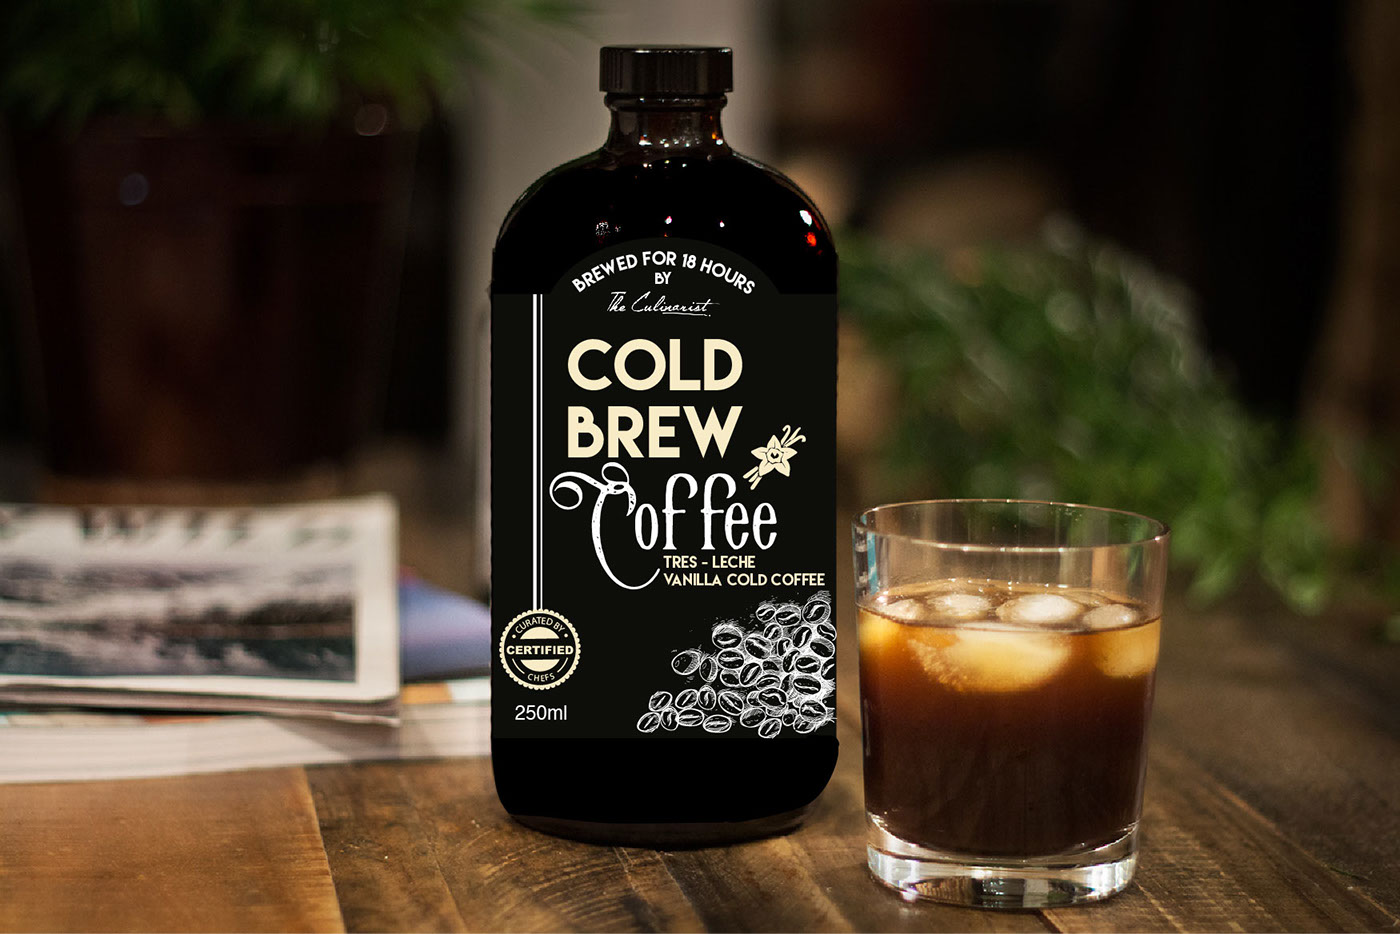 Cold Brew Coffee Coffee coffee packaging amber bottle prototype Packaging label design Label